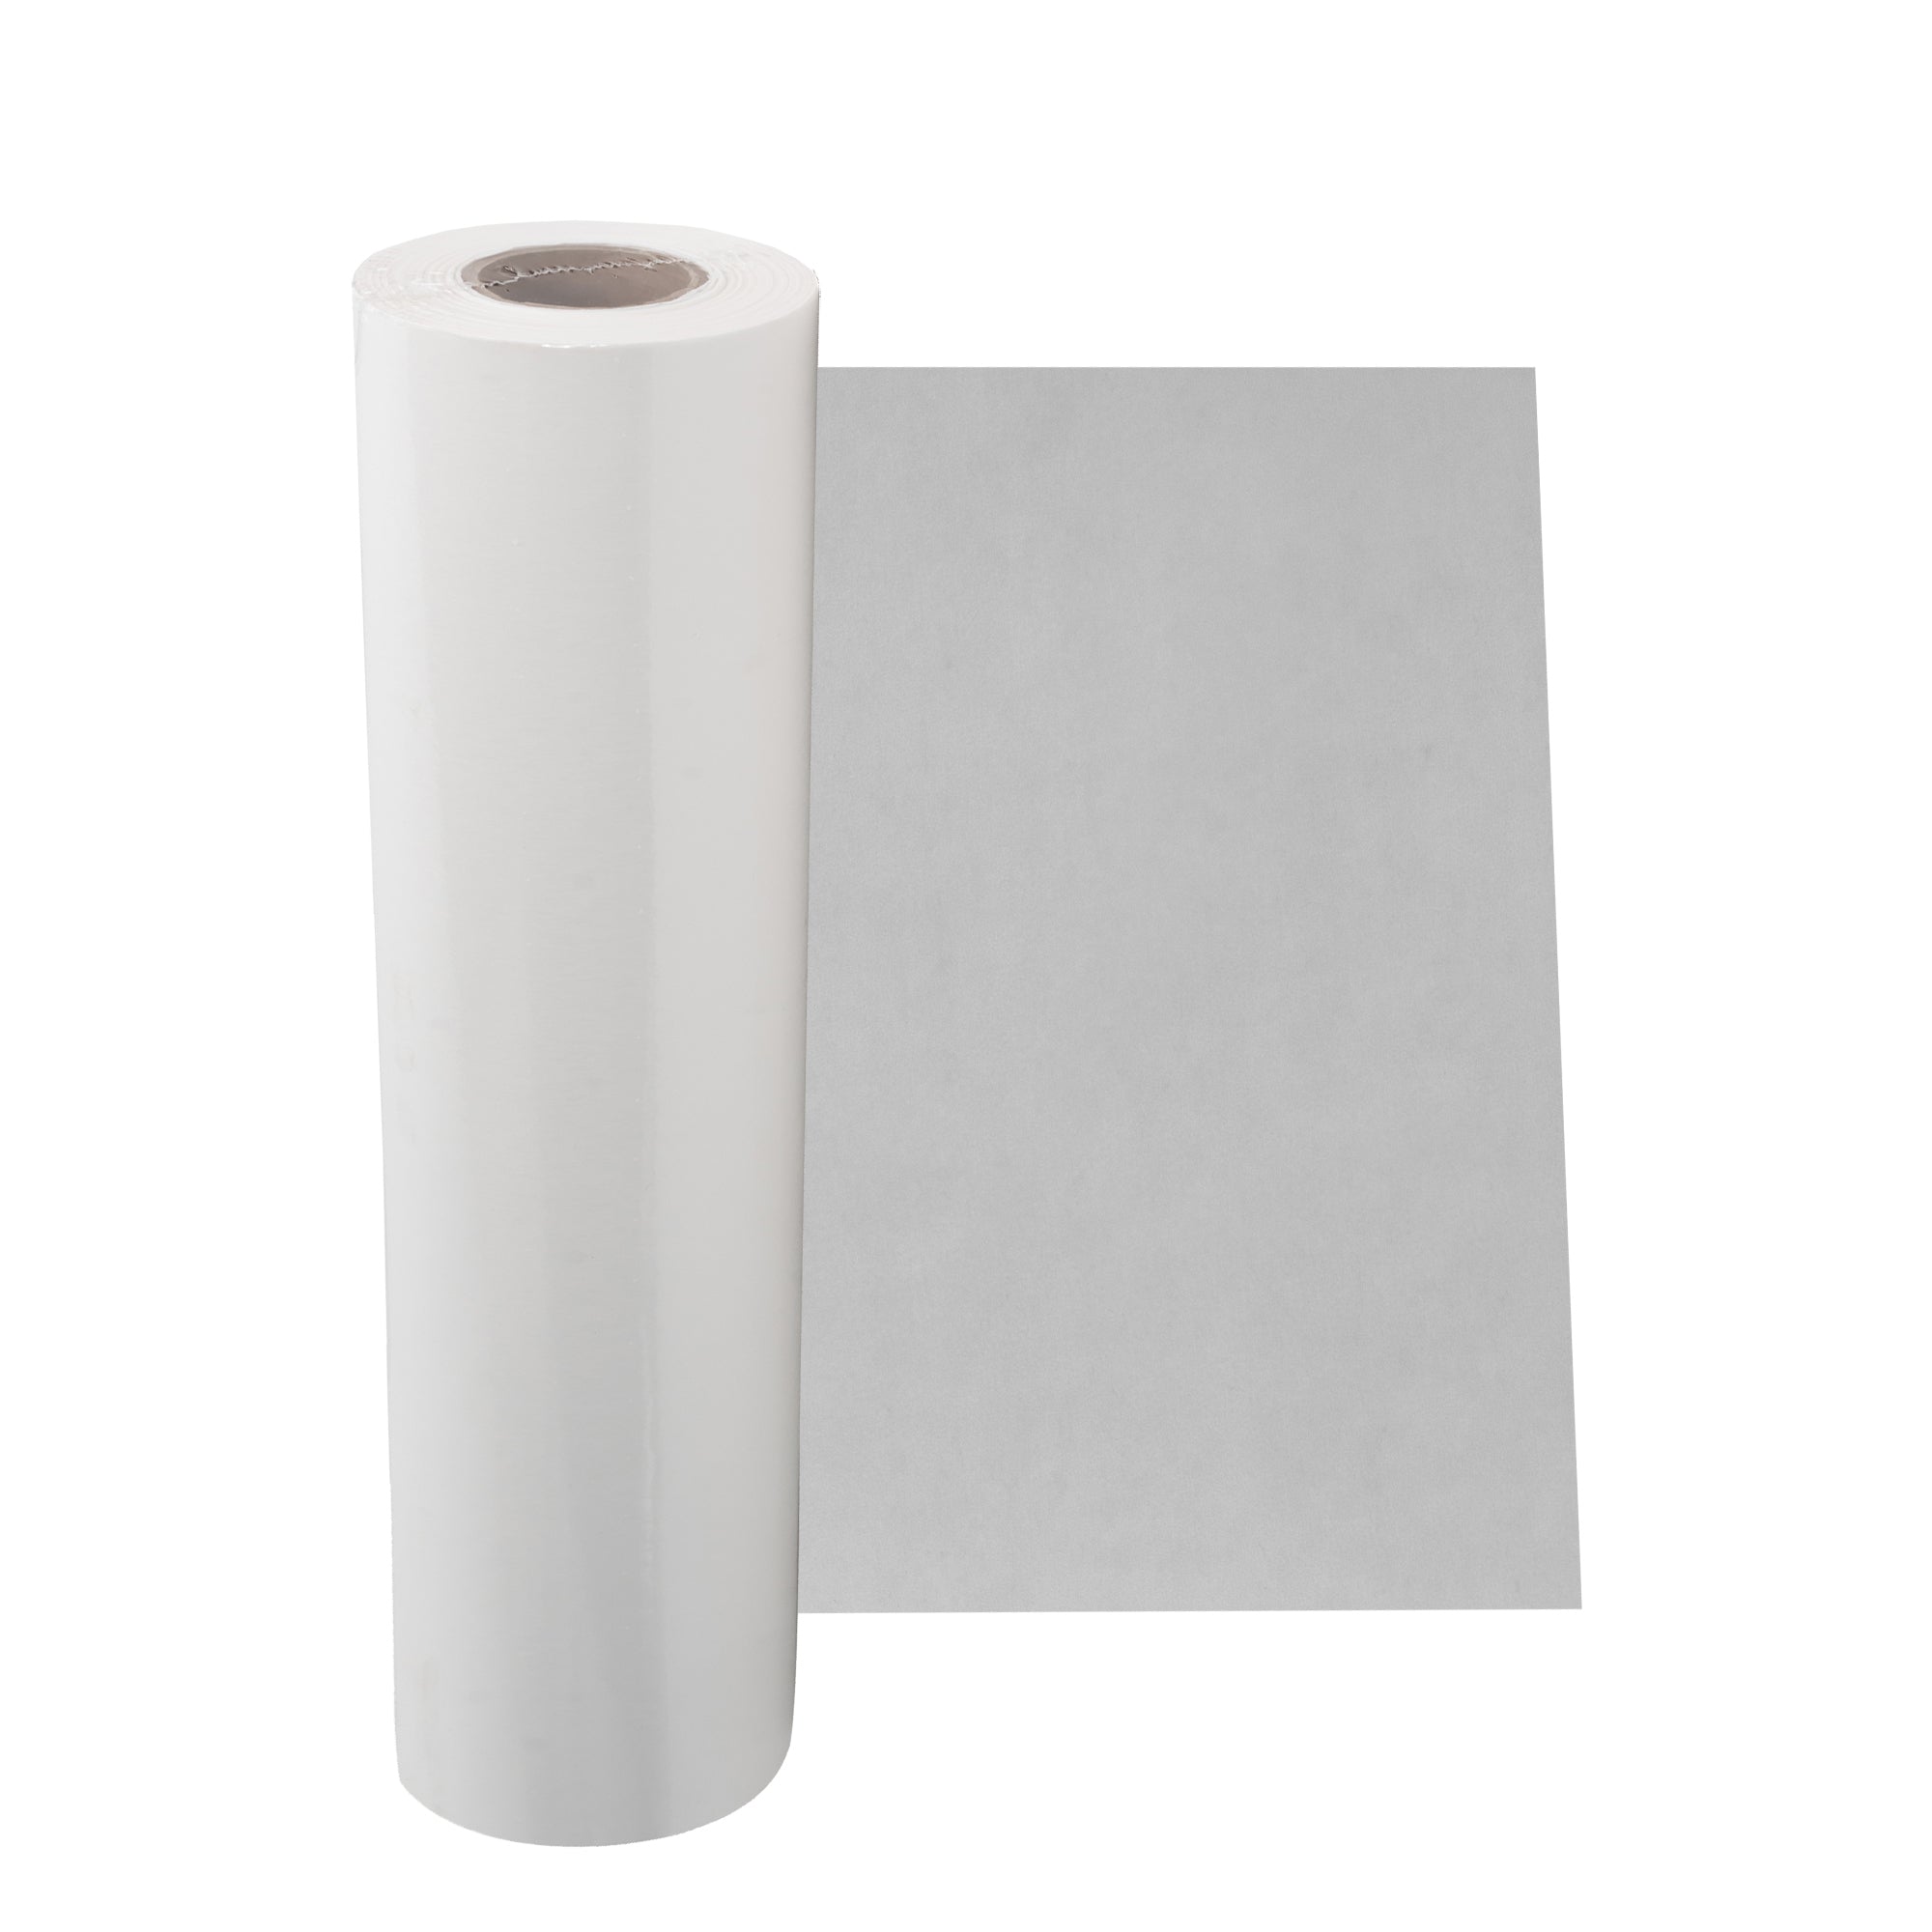 Pacific Arc, Tracing Paper Roll, White, 6 Inch X 50 Yard Roll 